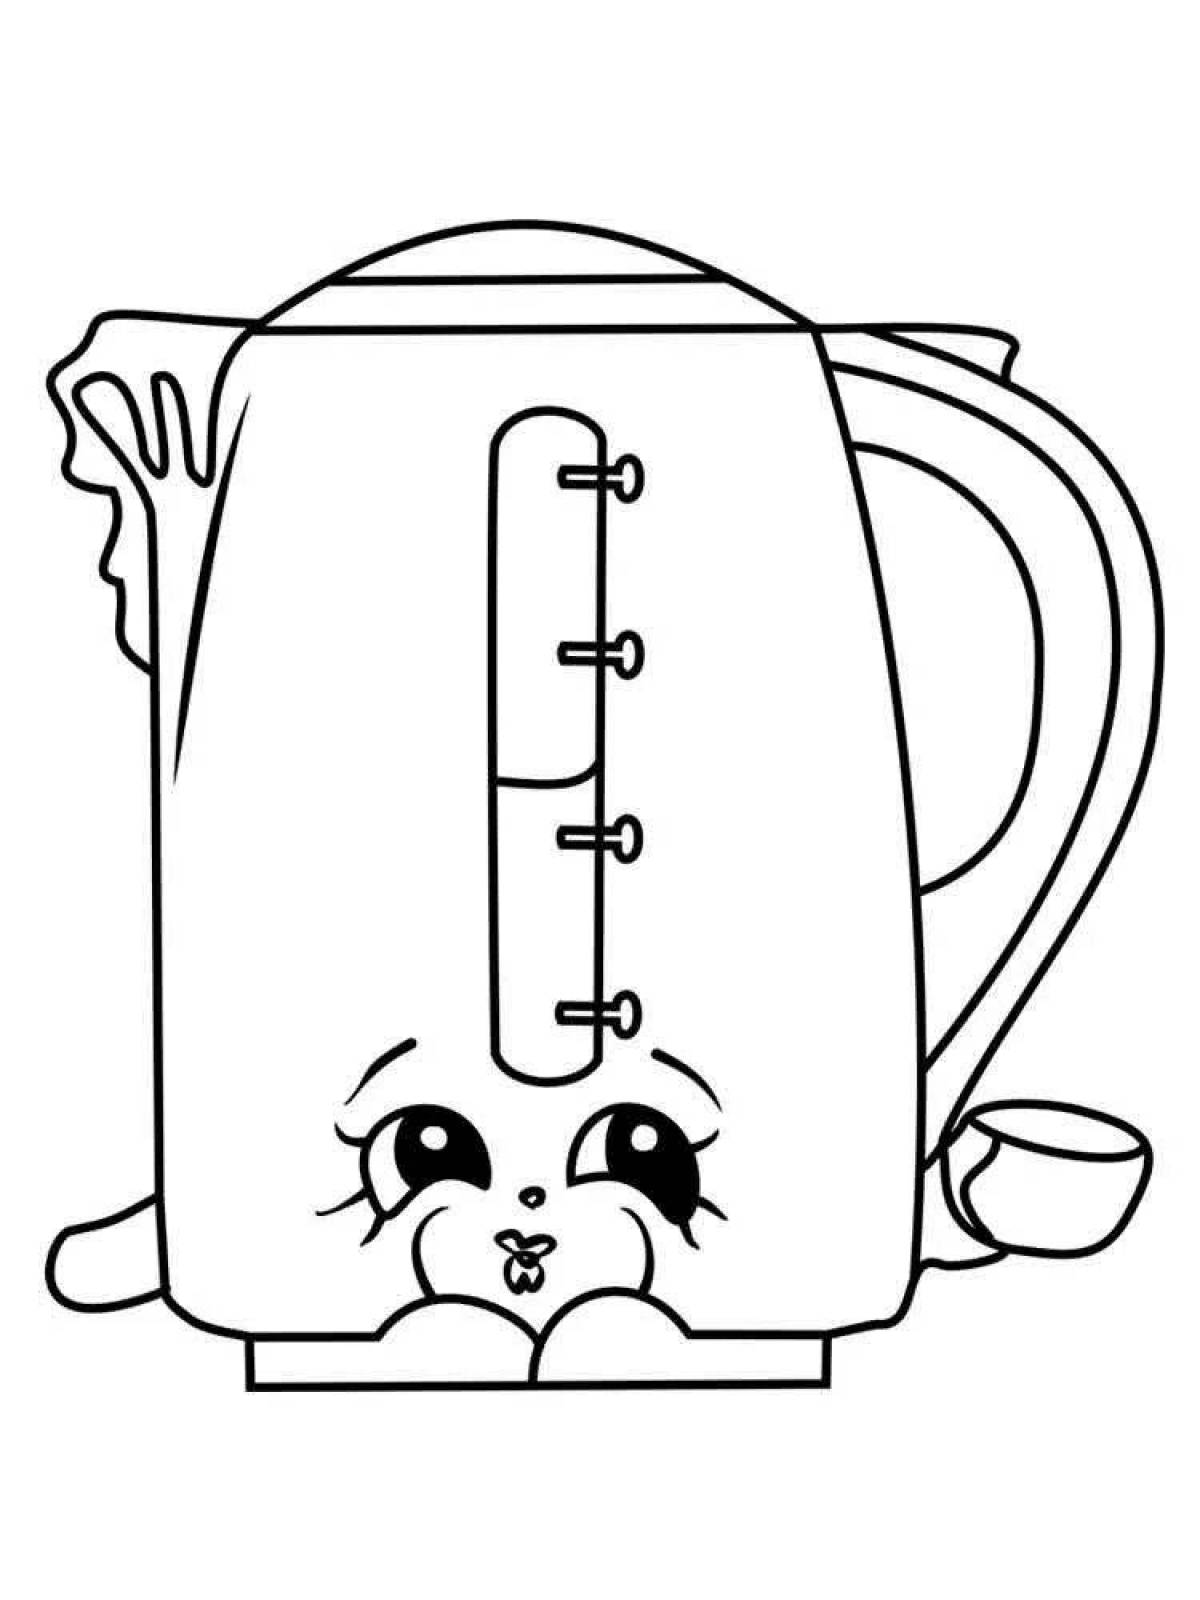 Coloring page bright electric kettle